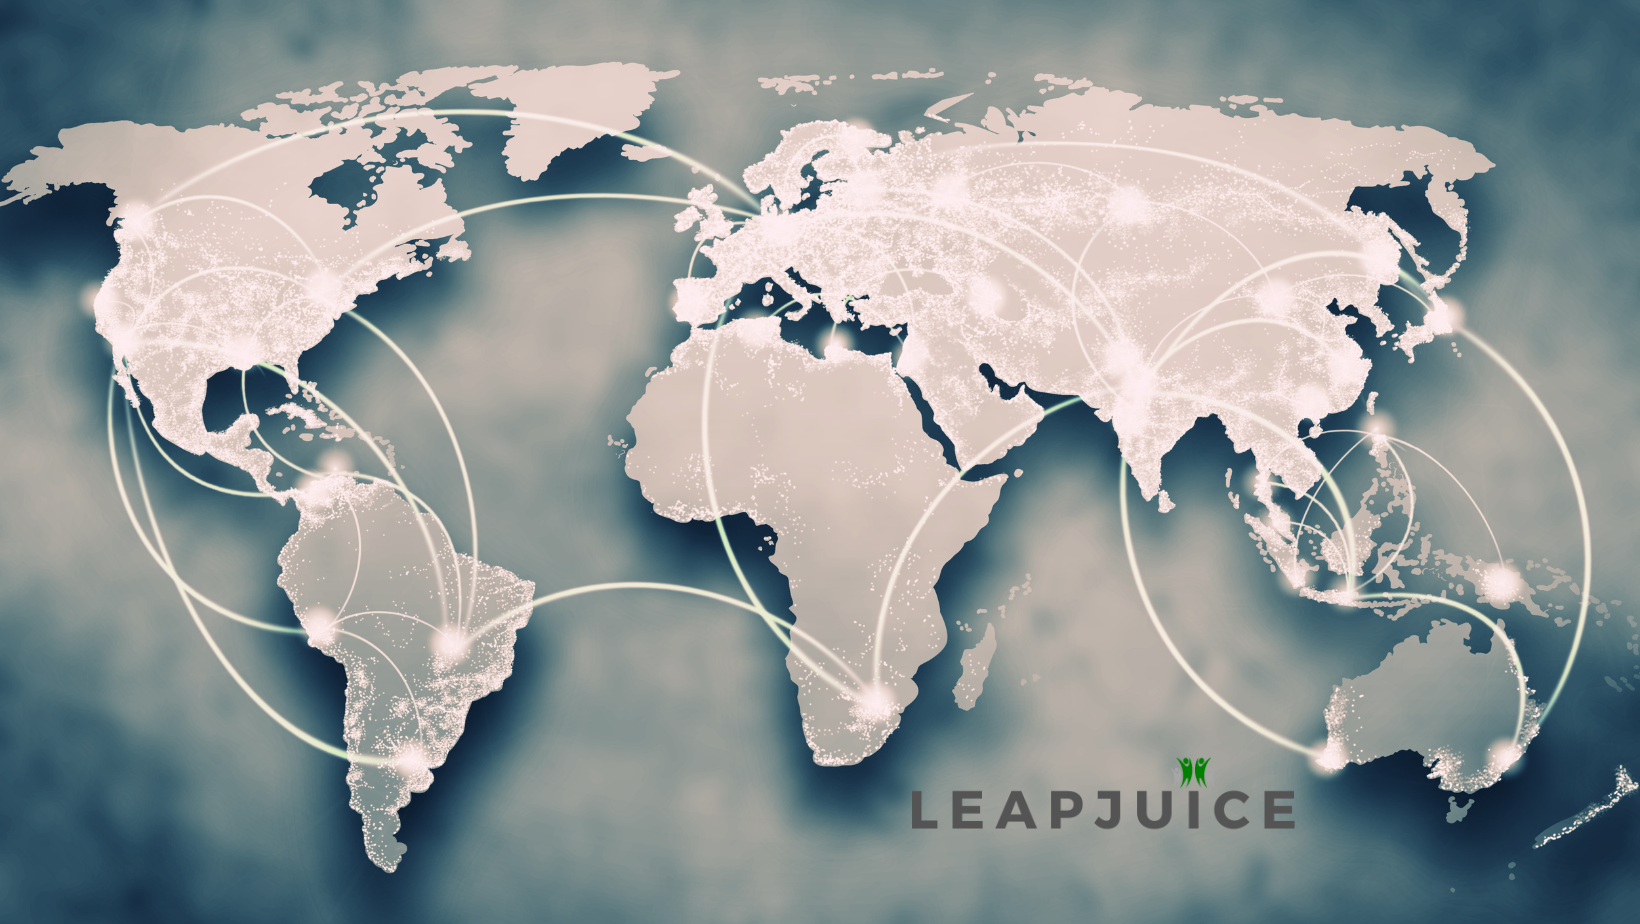 Picture showing globe and countries, representing Leapjuice CDN for Managed Ghost CMS and Managed WordPress hosting.